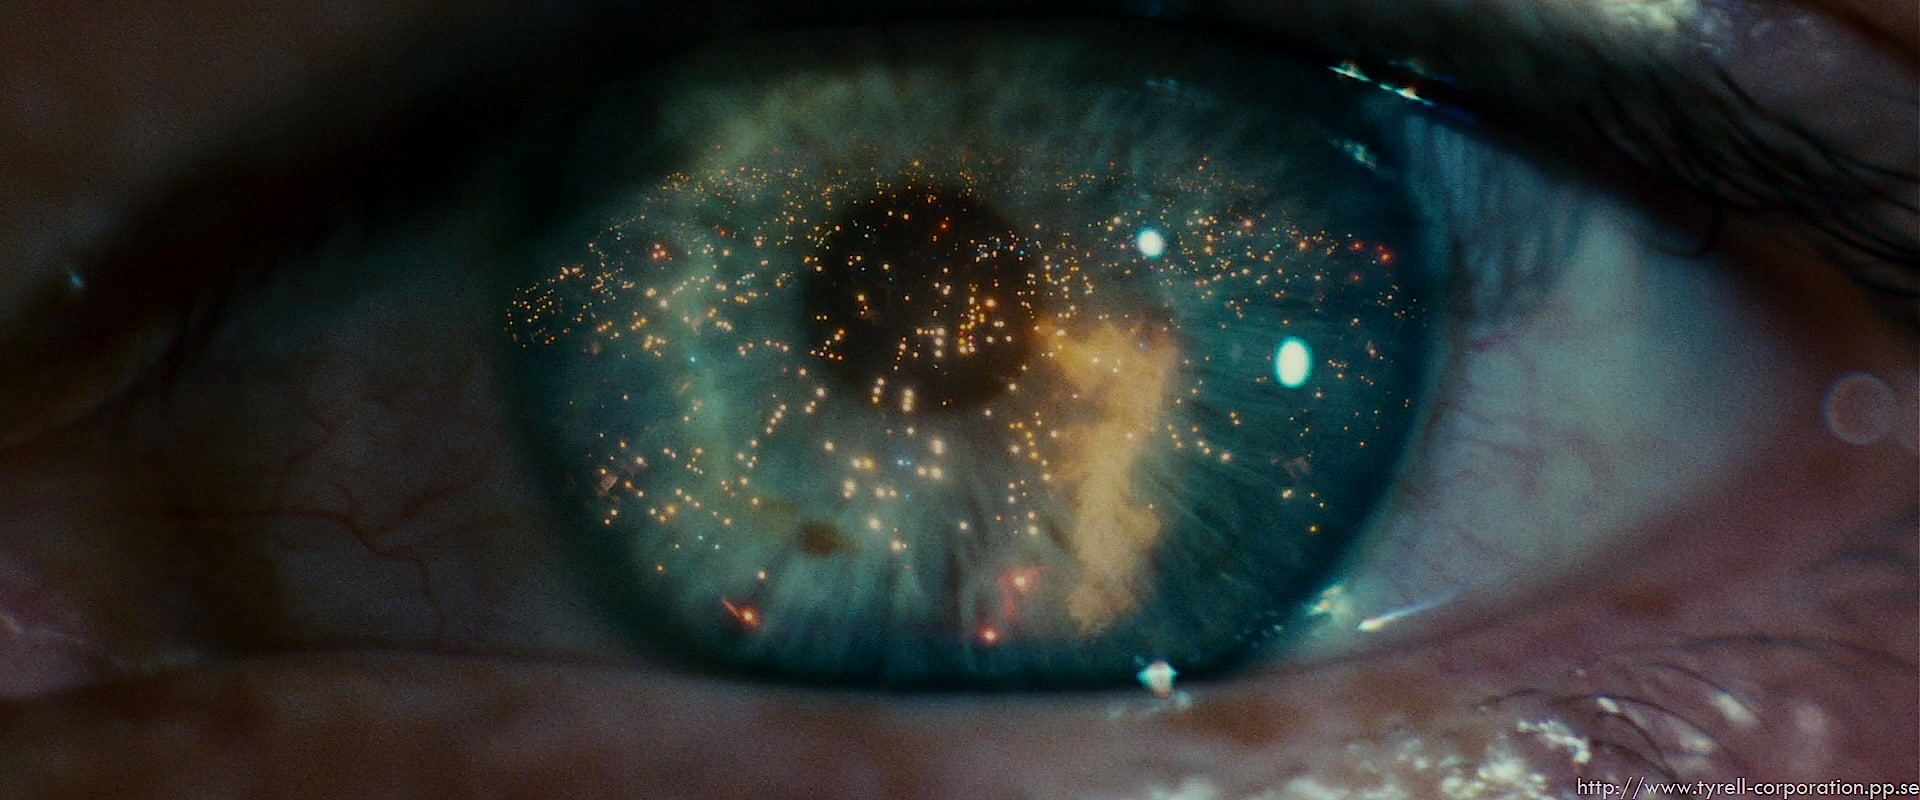 science fiction, movies, eyes, Blade Runner